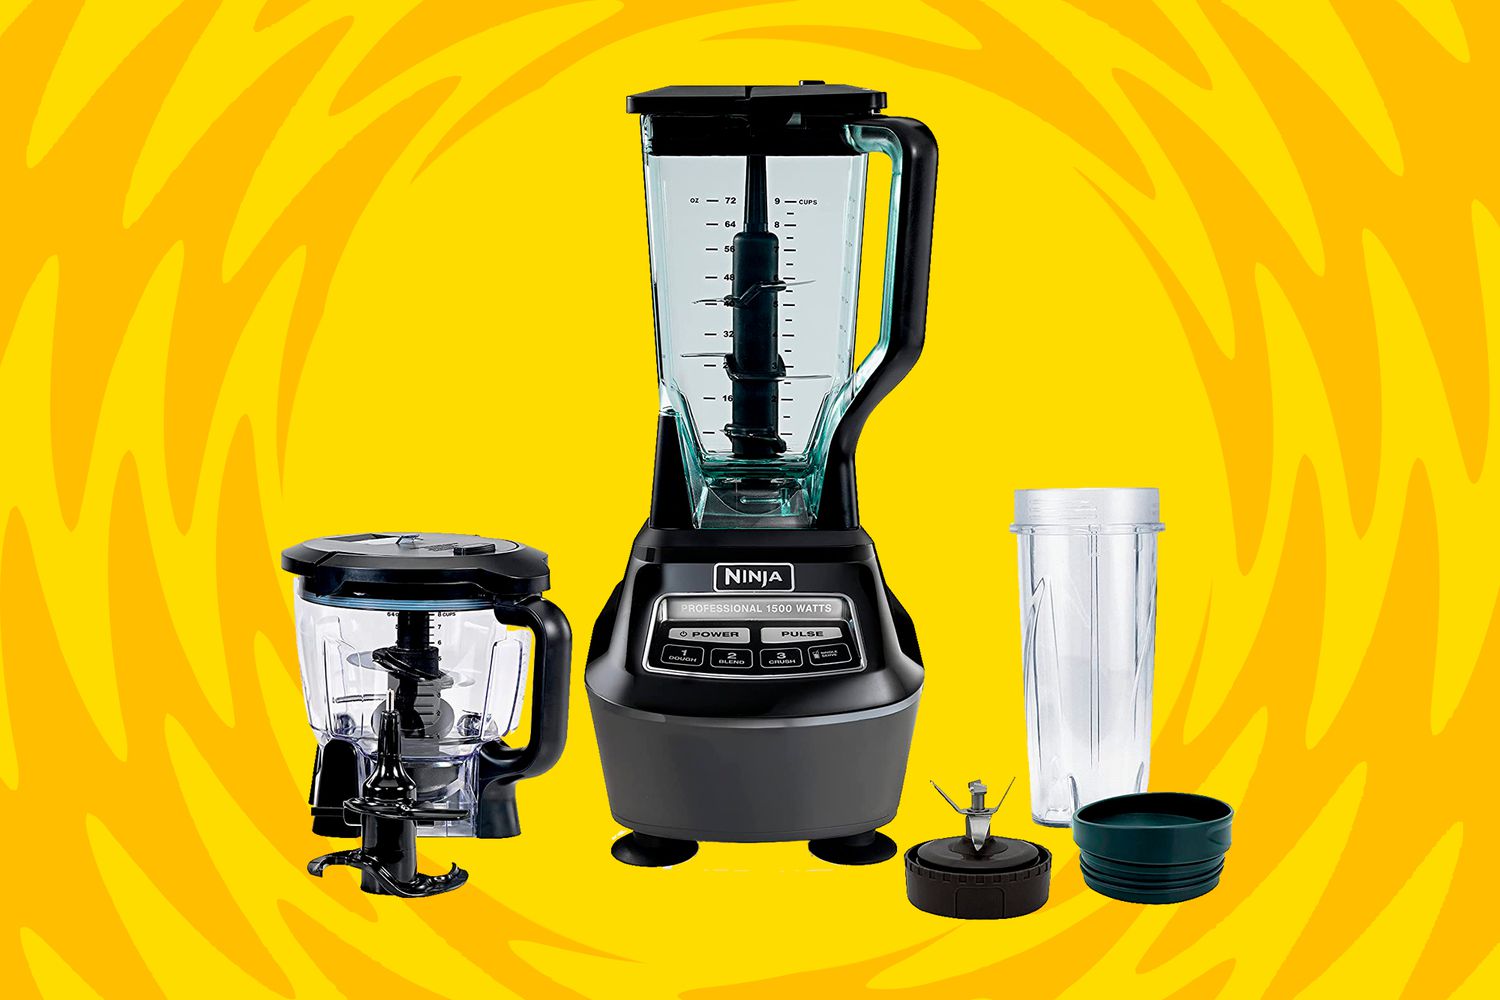 a photo of the Ninja Mega Kitchen System with the included 72 oz. Pitcher, 8-Cup Food Processor, and 16 oz. Single Serve Cup